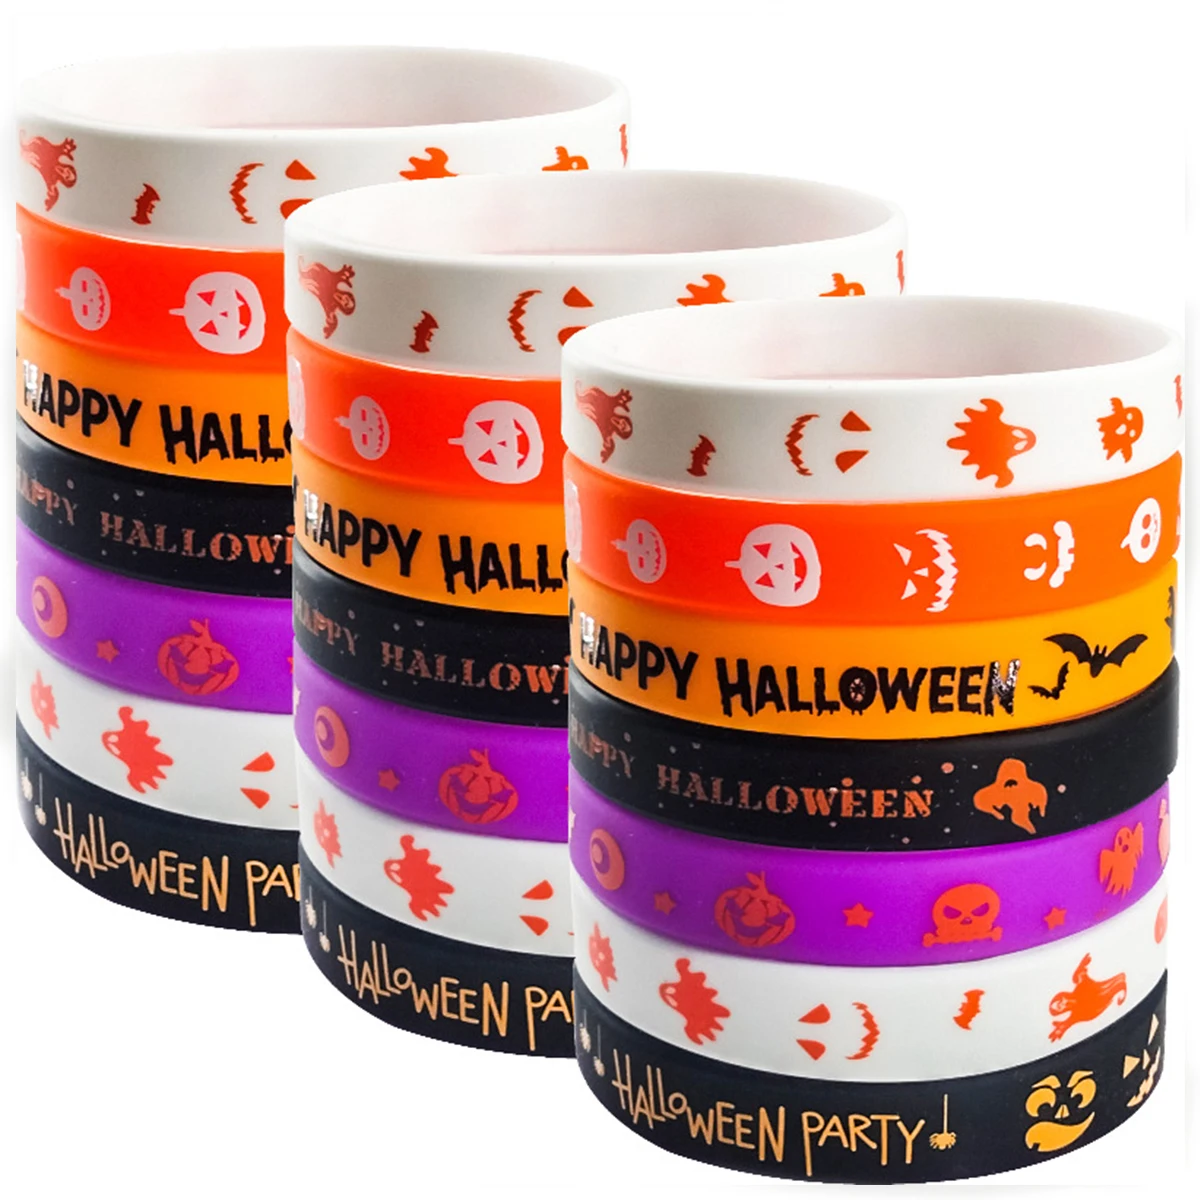 

12pcs Halloween Silicone Bracelets Ghost Pumpkin Witch Bat Spider Rubber Wristband Trick Or Treat Happy Halloween Party Decor